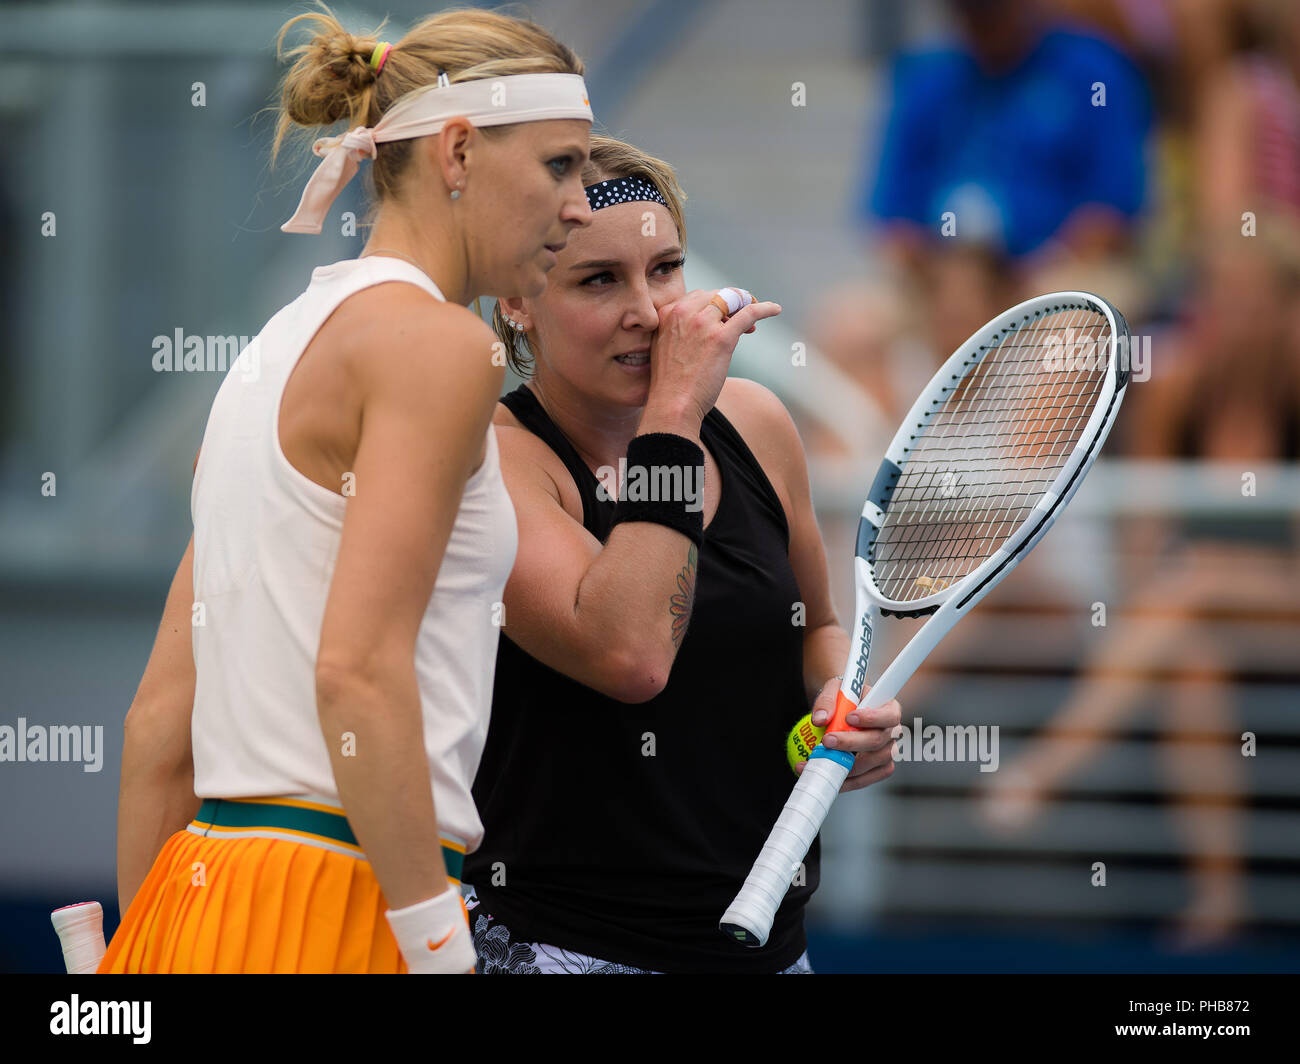 August 31, 2018 - Bethanie Mattek-Sands of the United States & Lucie Safarova of the Czech Republic playing doubles at the 2018 US Open Grand Slam tennis tournament, New York, USA, August 31th 2018. Credit: AFP7/ZUMA Wire/Alamy Live News Stock Photo